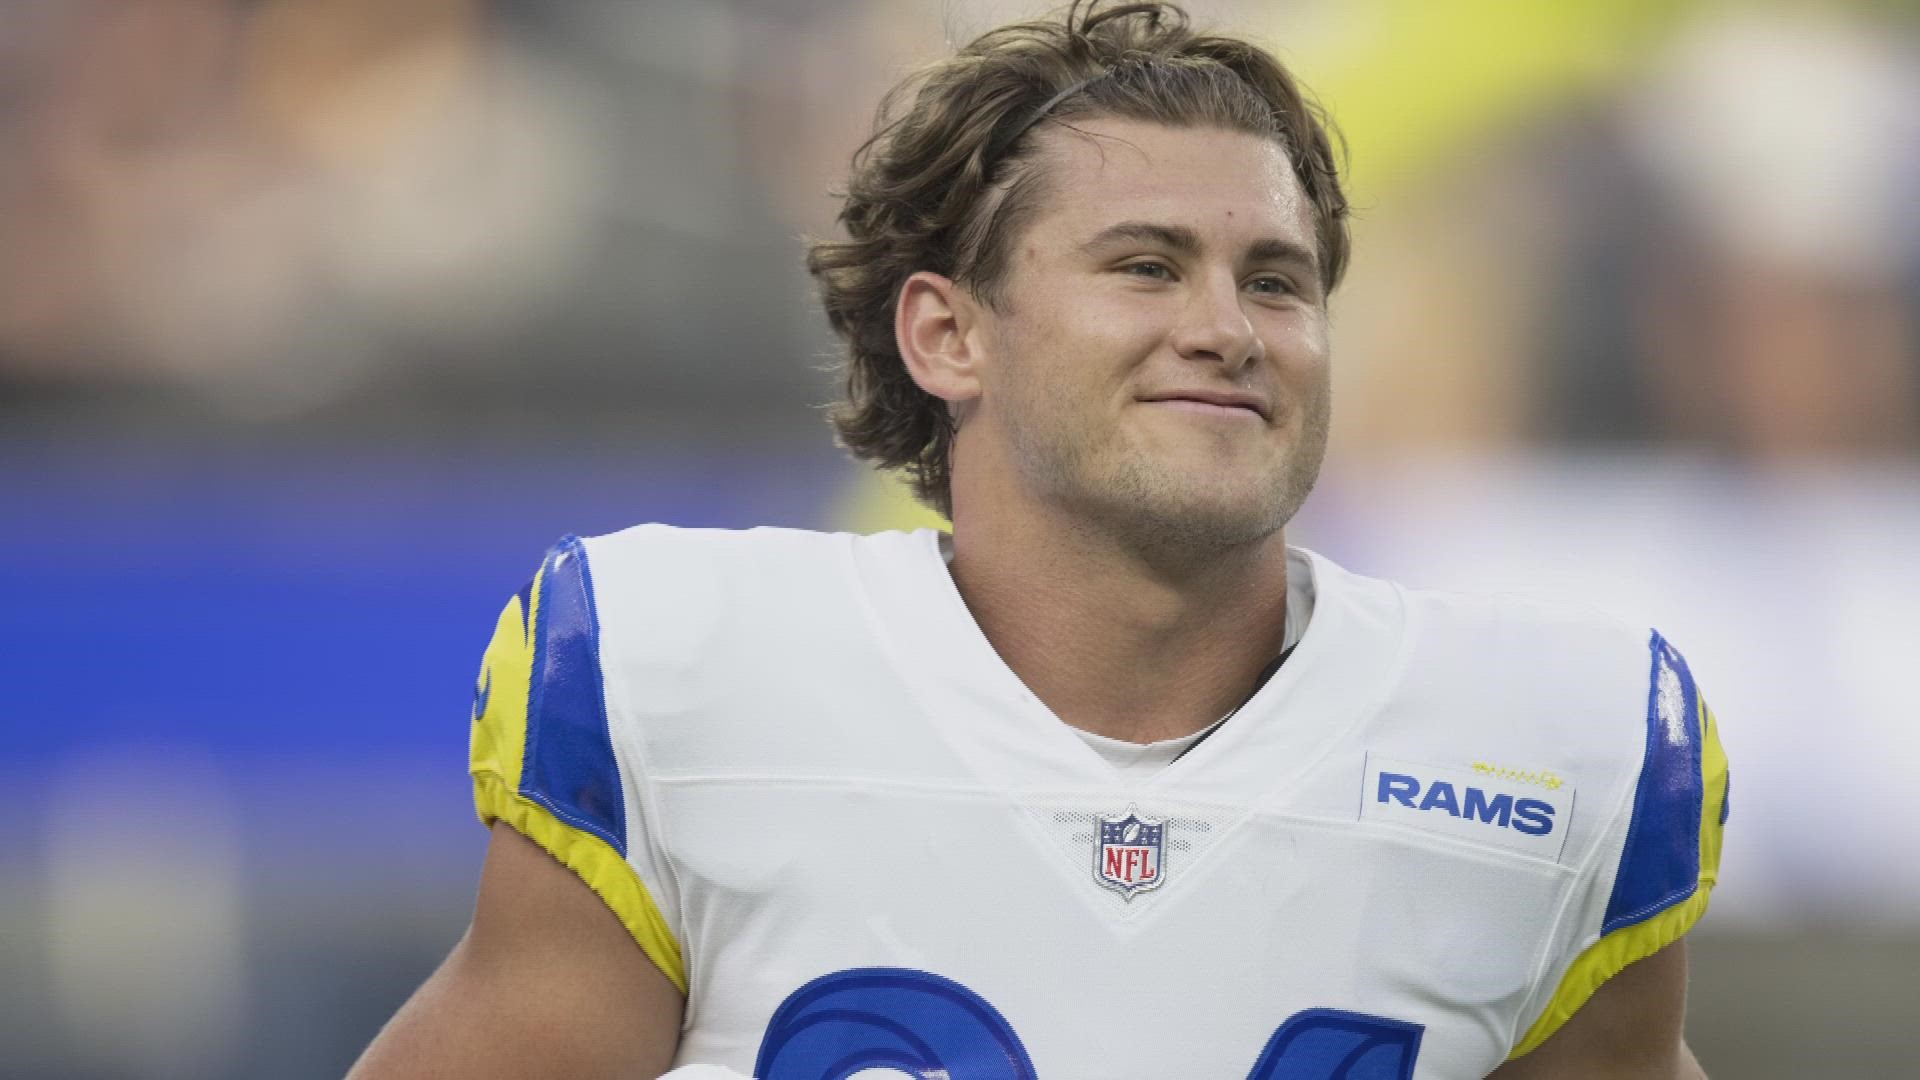 Jake Funk got his first taste of NFL action last Sunday, under the lights at SoFi Stadium, playing on special teams for the Los Angeles Rams.